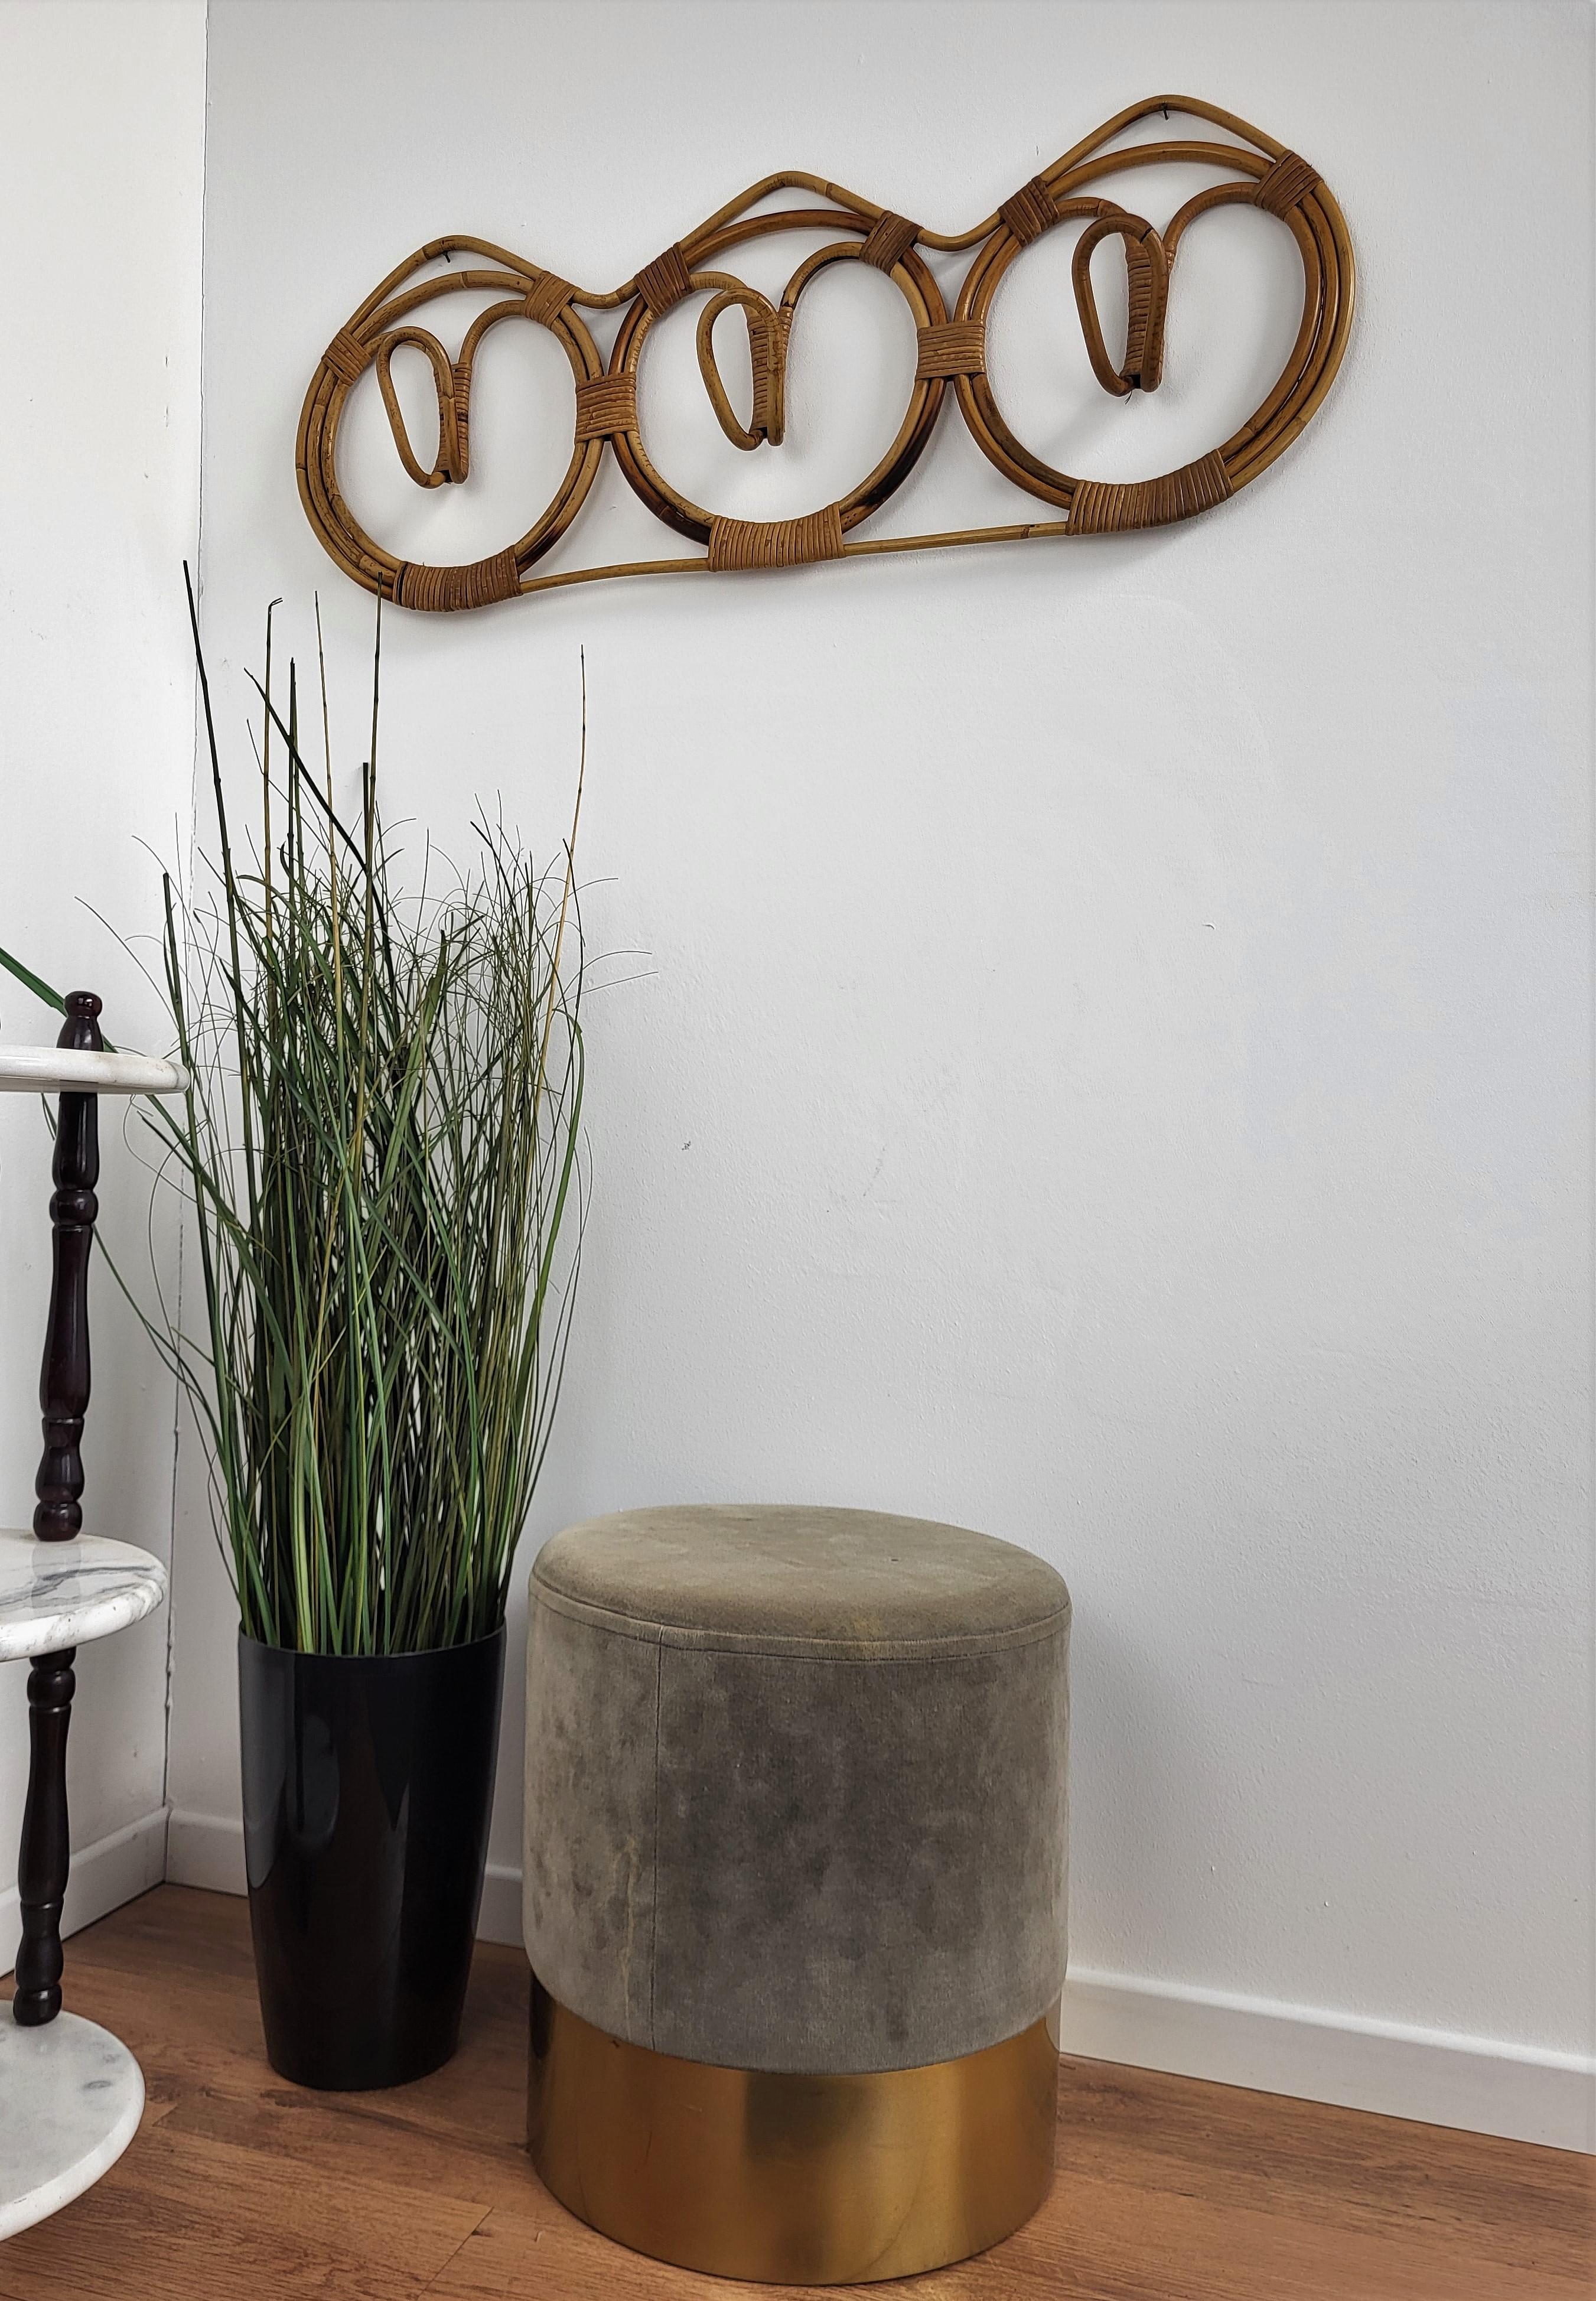 Beautiful 1960s Italian Mid-Century Modern coat hanger rack, perfect in any entrance hallway or room for coats and bags as well as in a bedroom or bathroom for bathrobes and towels. This charming piece is in the typical style of Audoux and Minet